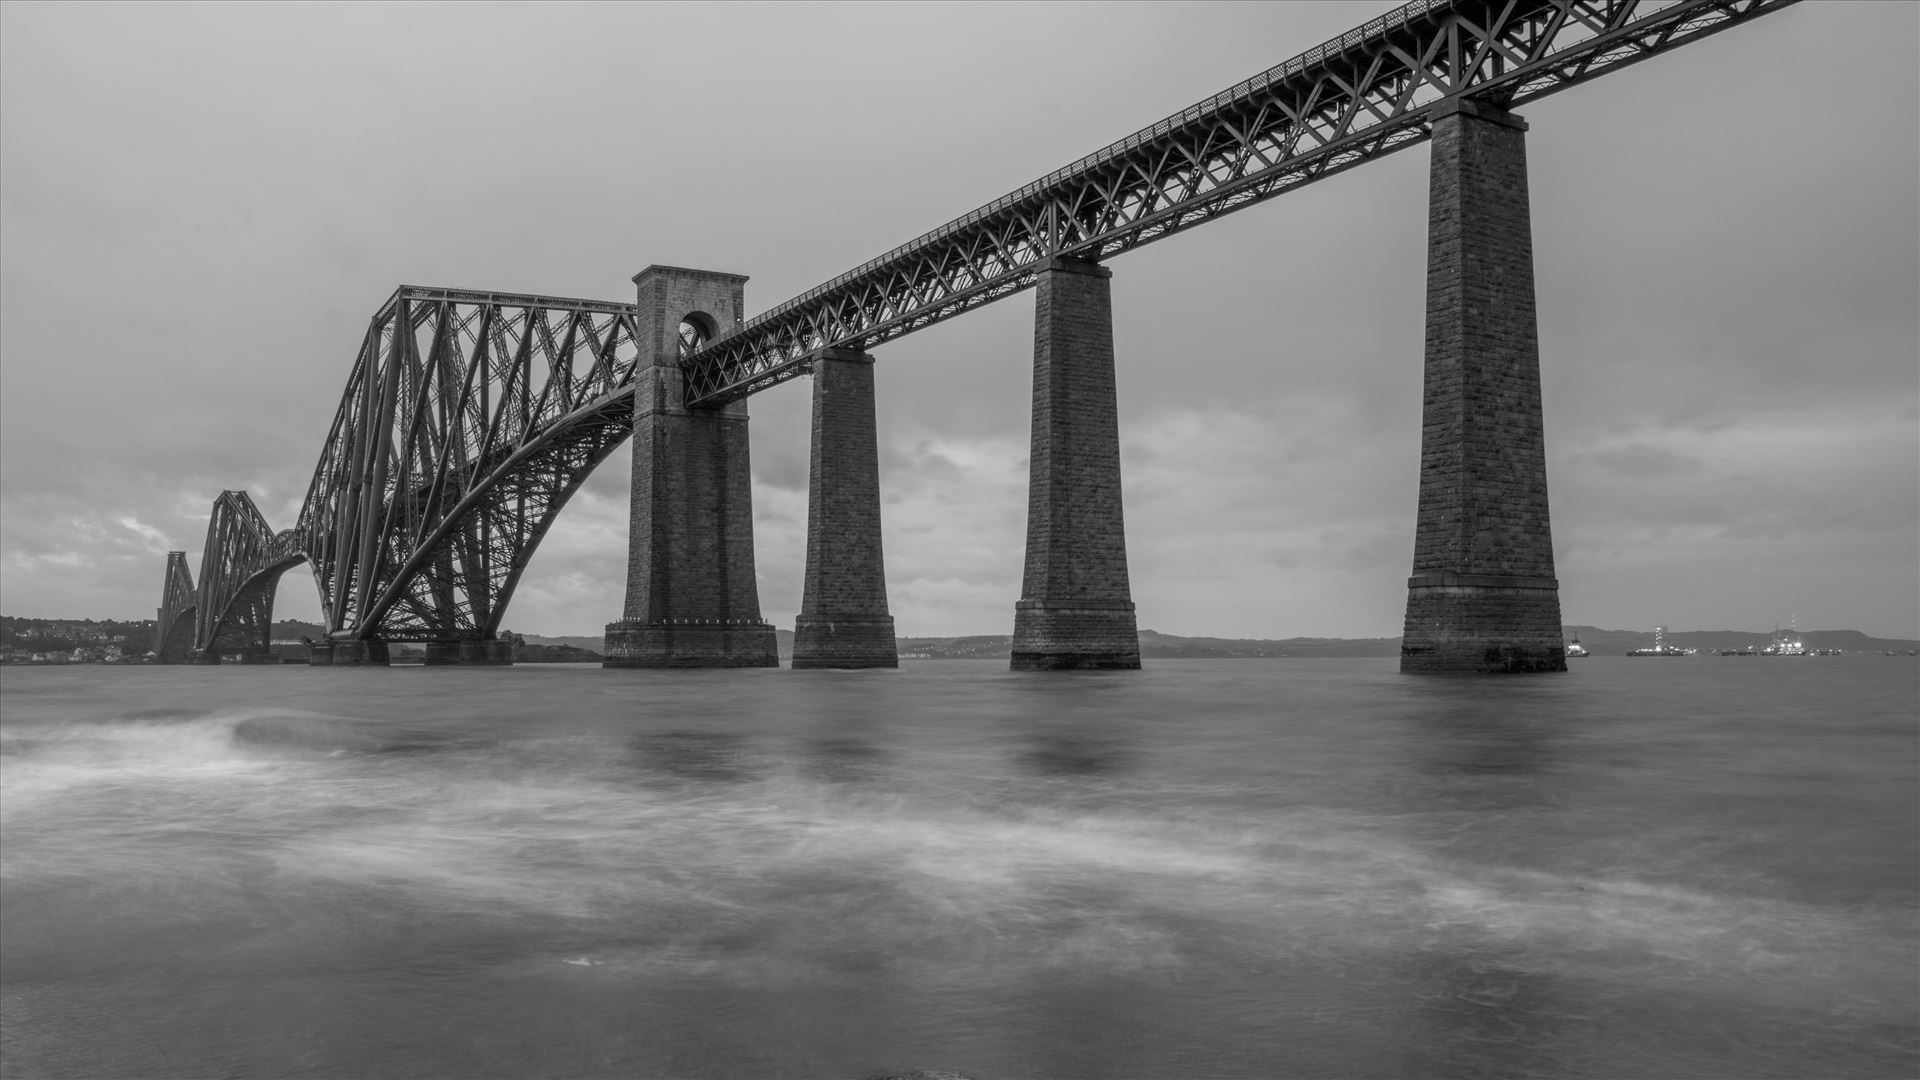 Forth rail bridge When it opened it had the longest single cantilever bridge span in the world, until 1919 when the Quebec Bridge in Canada was completed. It continues to be the world's second-longest single cantilever span, with a span of 1,709 feet (521 m). by philreay